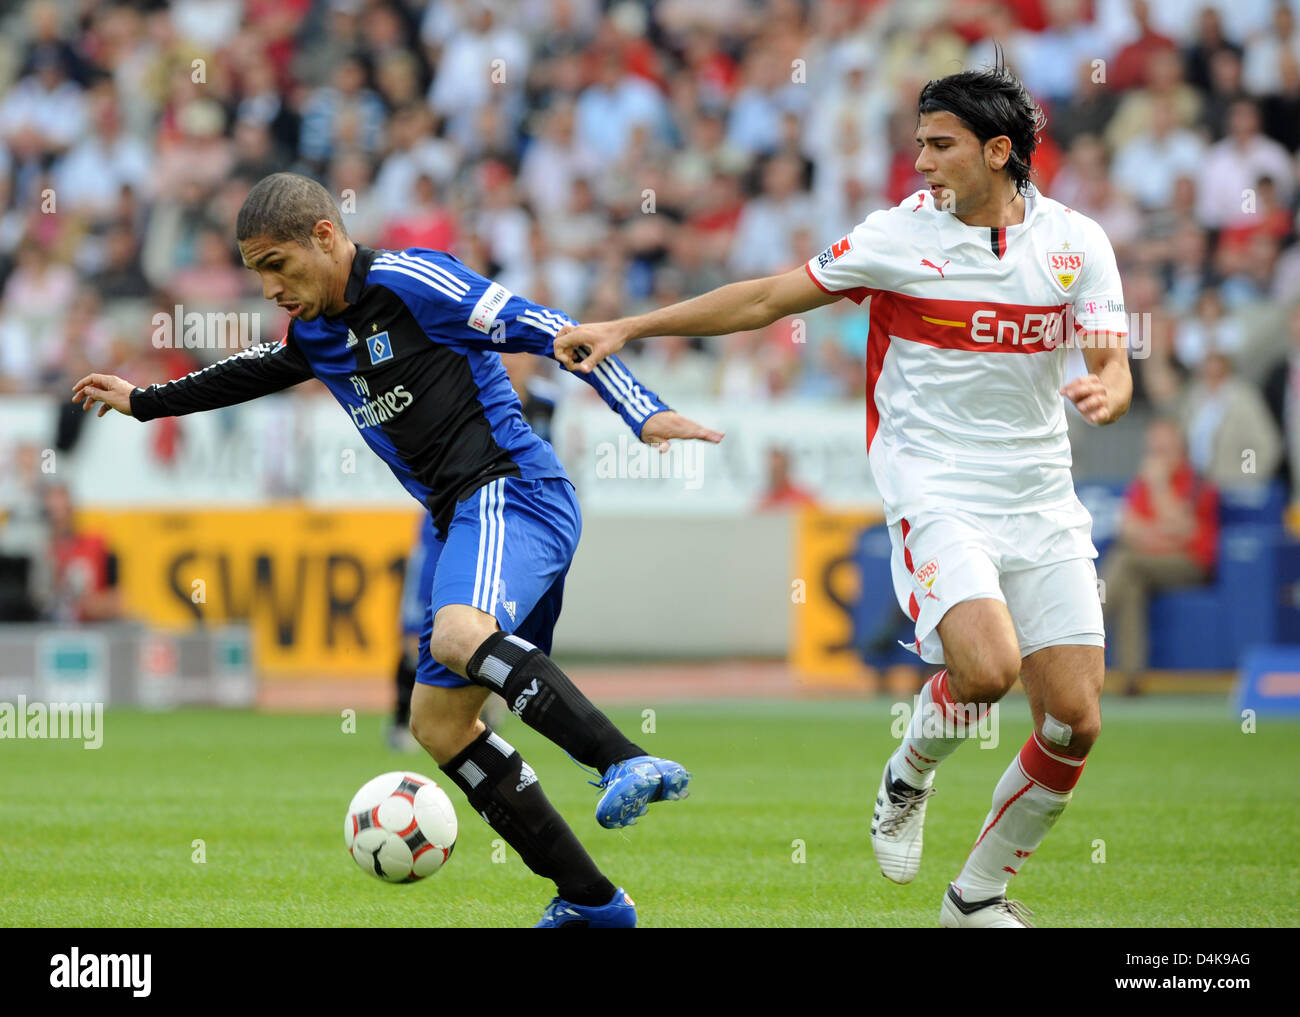 Stuttgart?s Serdar Tasci (R) fights for the ball with Hamburg?s Jose Paolo Guerrero during the Bundesliga match VfB Stuttgart vs SV Hamburg at Mercedes-Benz Arena stadium in Stuttgart, Germany, 12 April 2009. Photo: ULI DECK (ATTENTION: EMBARGO CONDITIONS! The DFL permits the further utilisation of the pictures in IPTV, mobile services and other new technologies no earlier than two Stock Photo